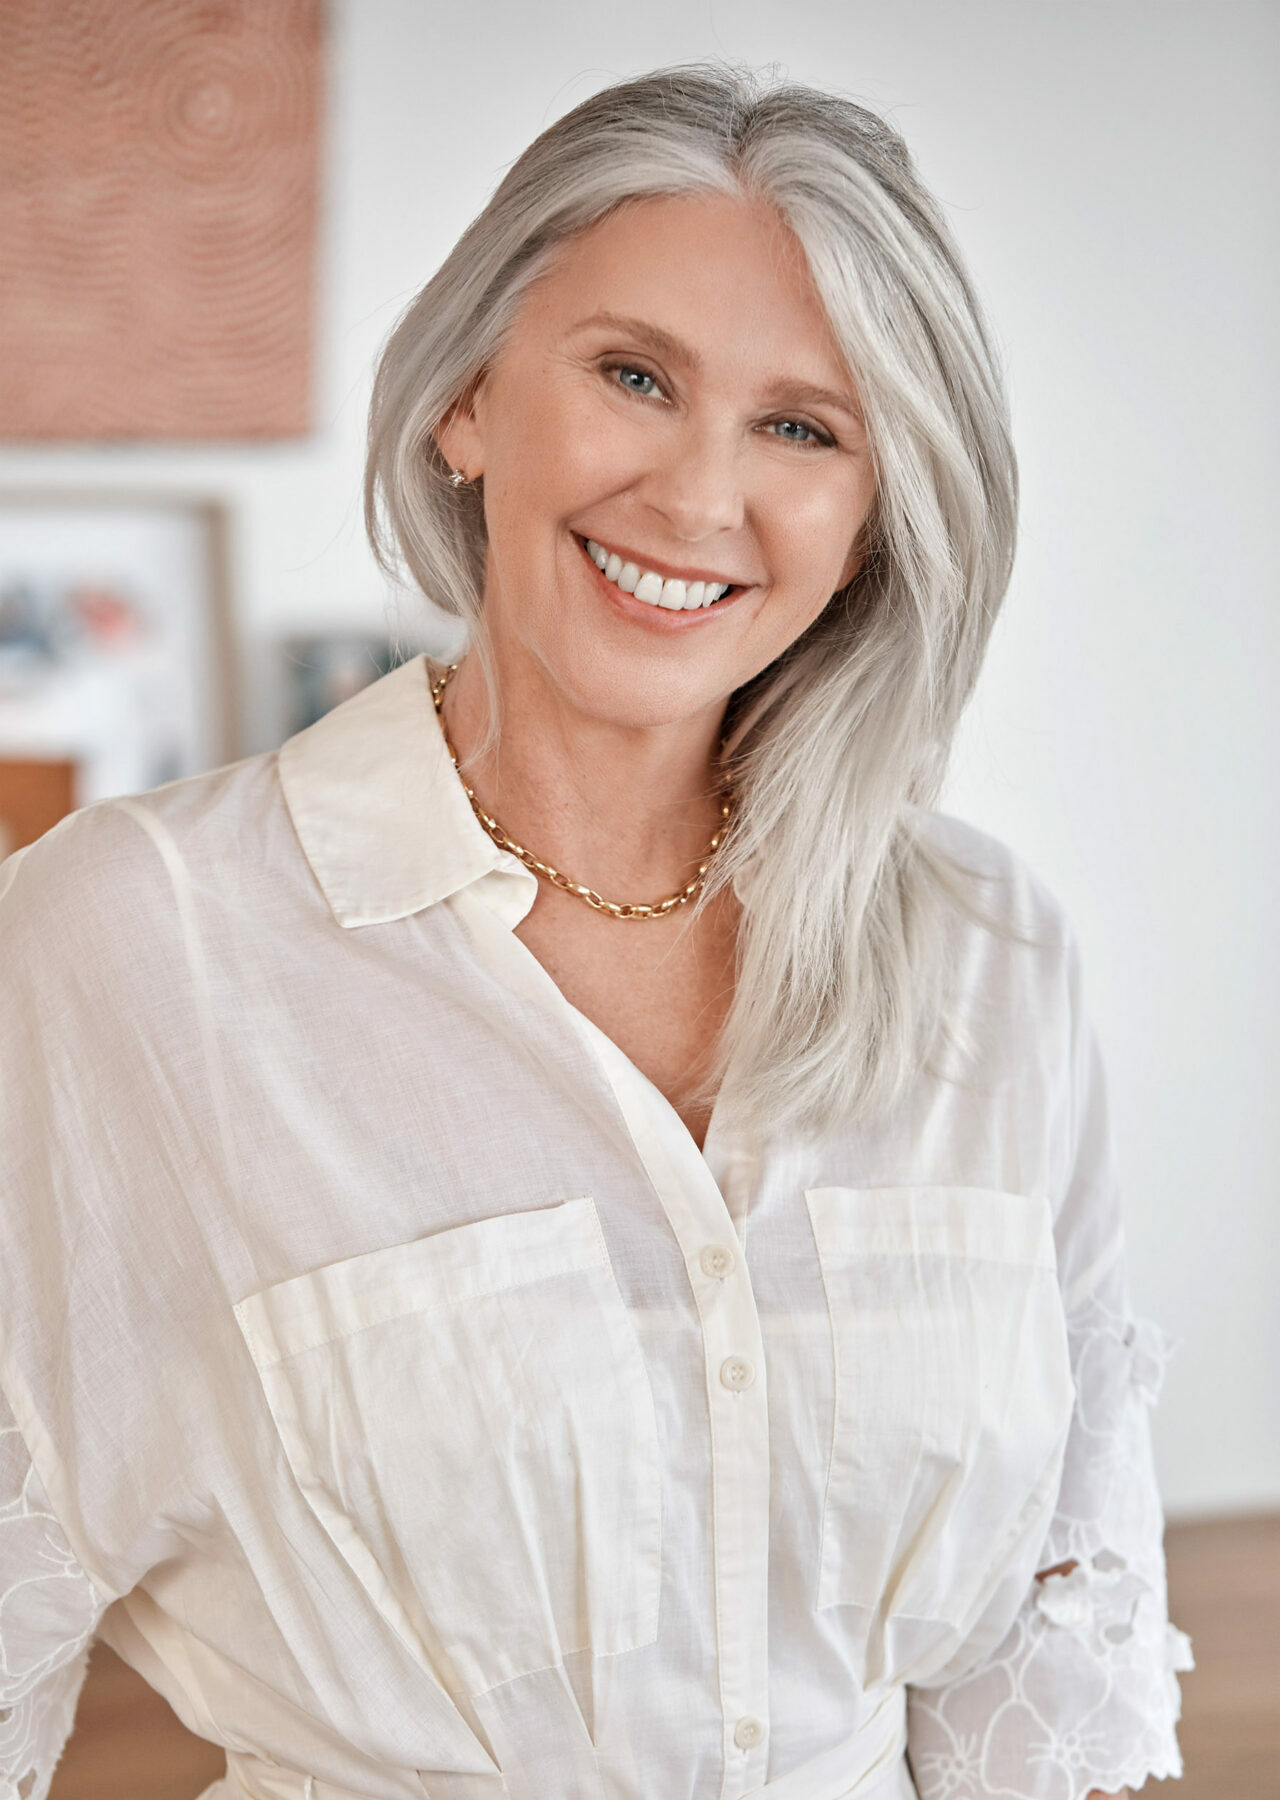 A woman with long grey hair and a button-up white dress smiles widely